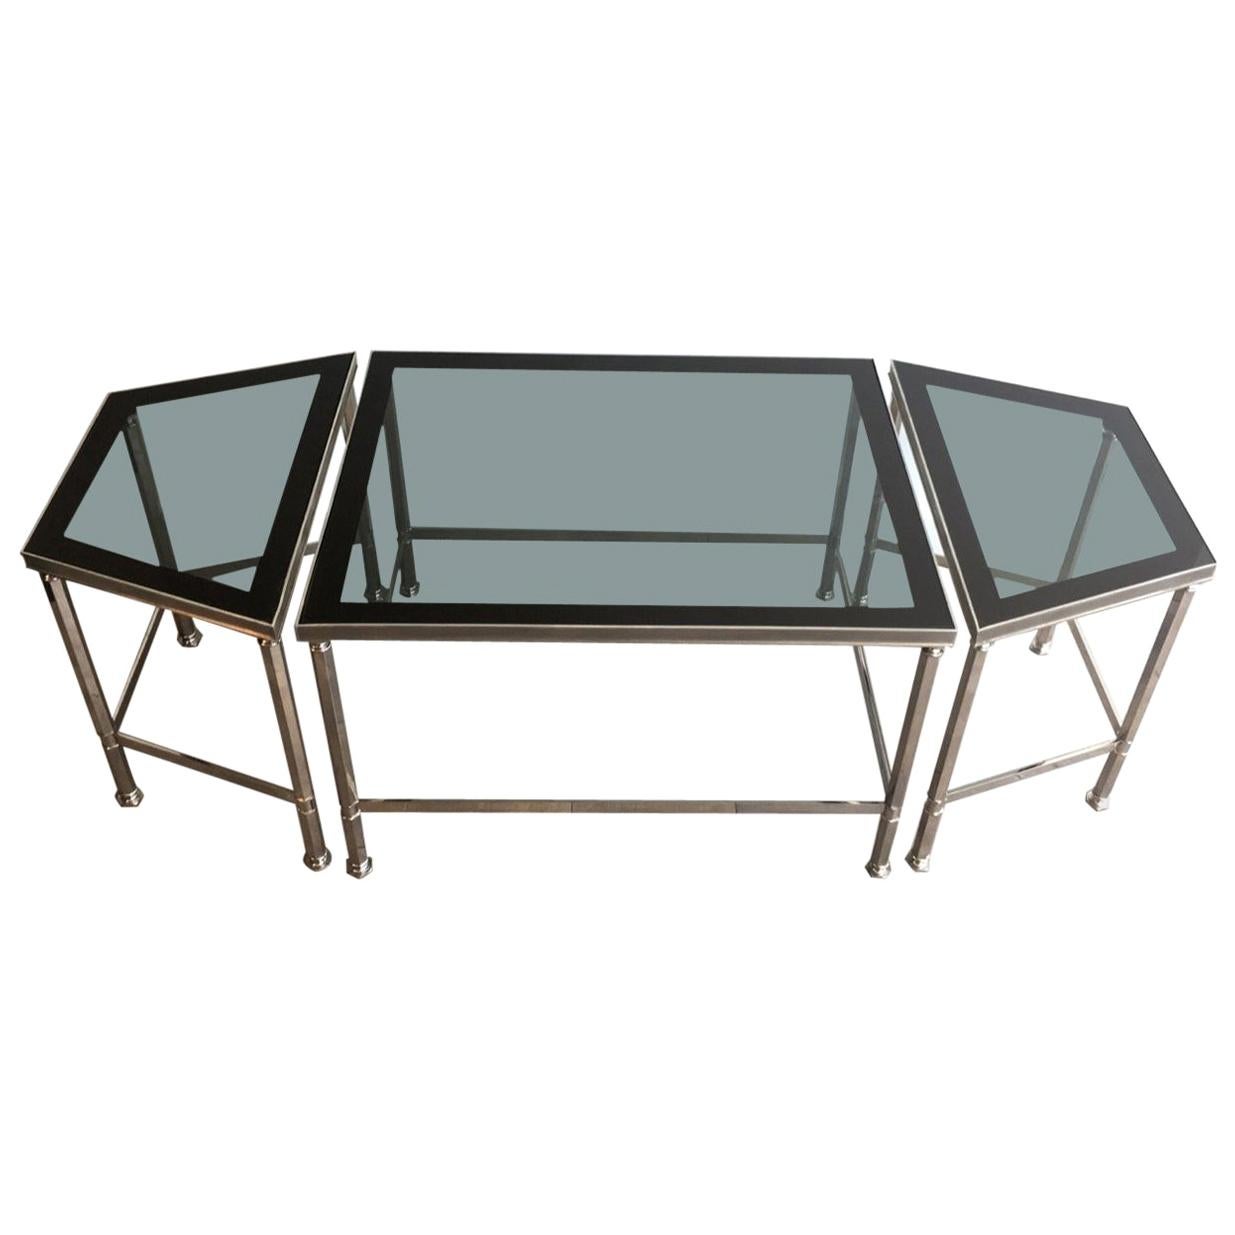 Rare Nickeled Three Elements Coffee Table